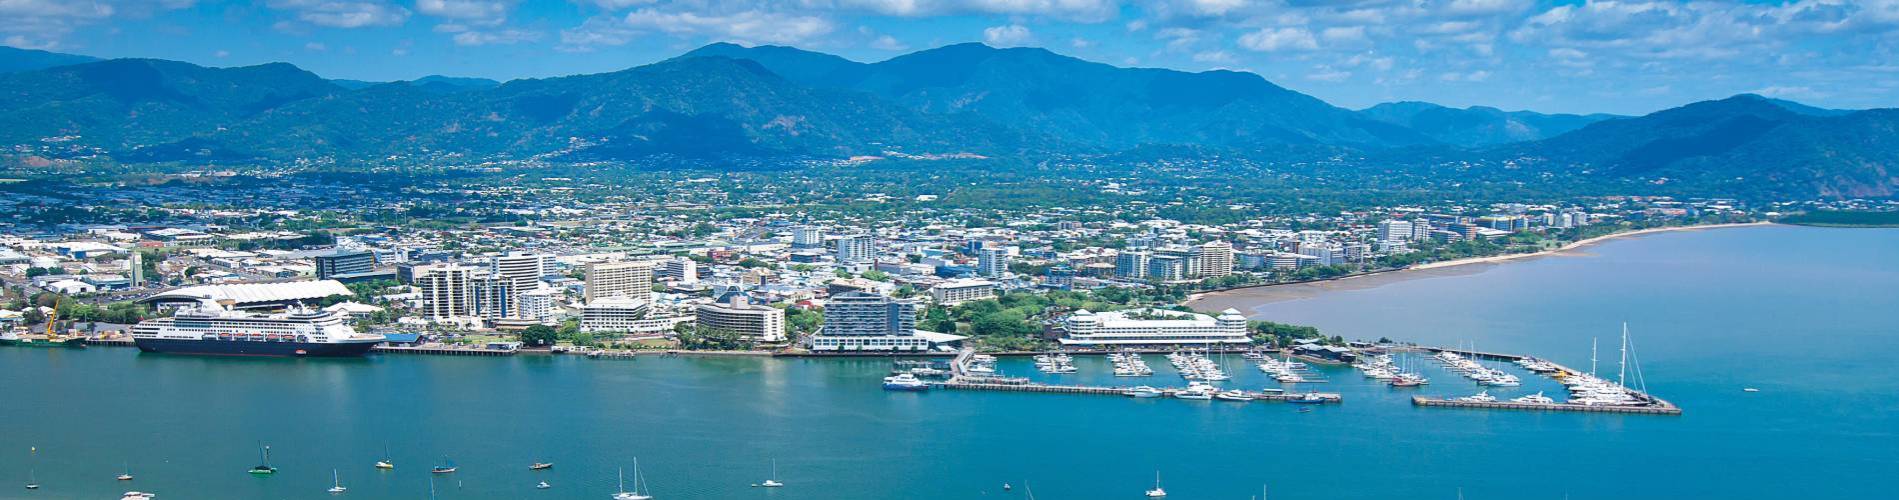 Cairns City and mountains